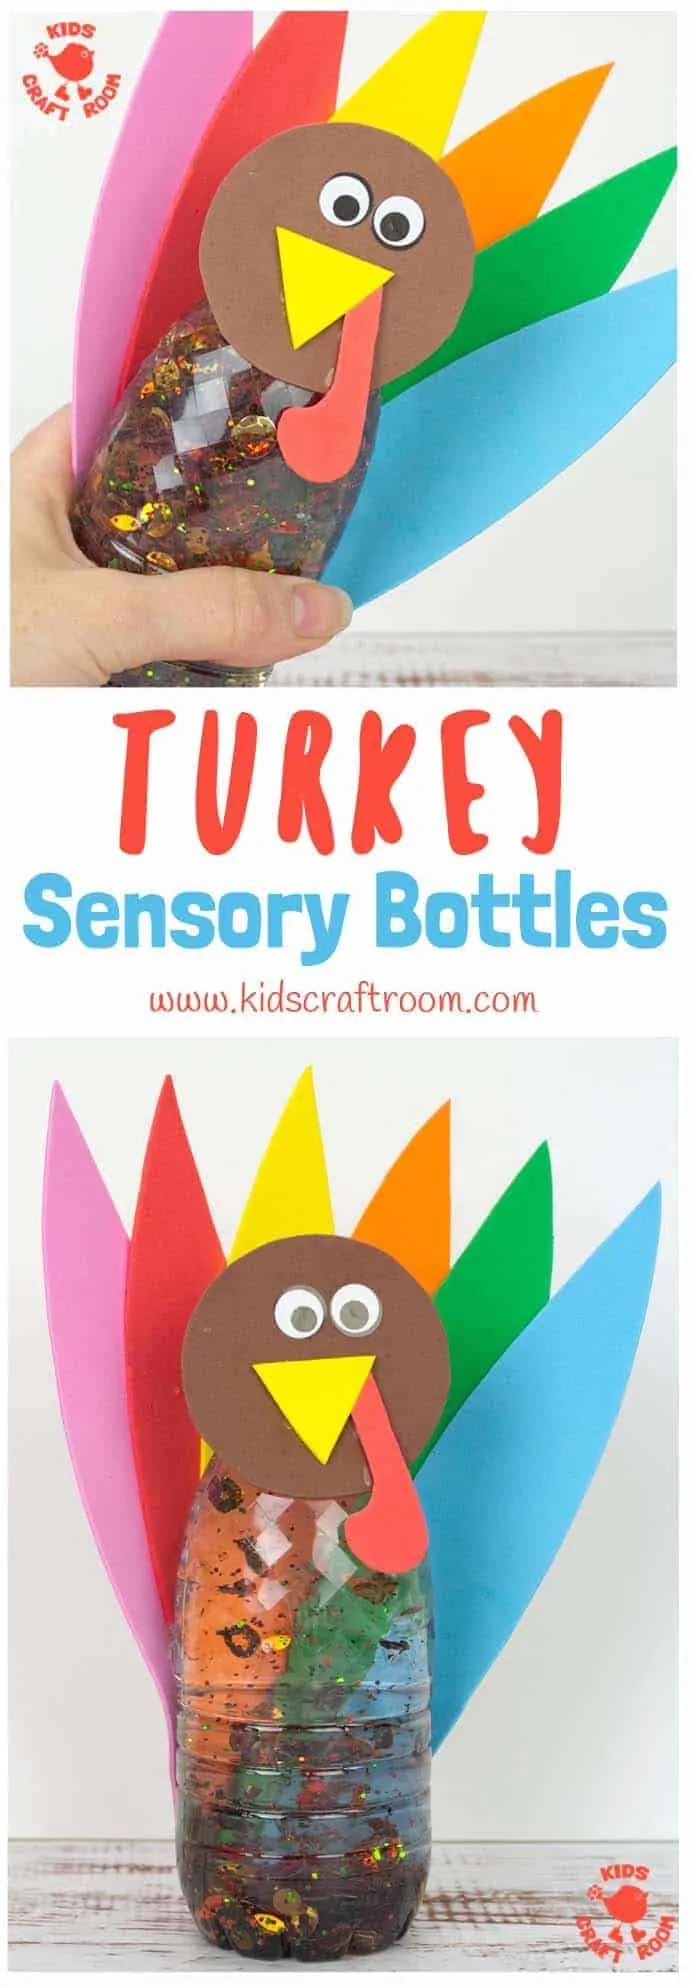 A close up of a Thanksgiving Turkey Sensory Bottles being held in someone's hand to show the glitter swirling inside.